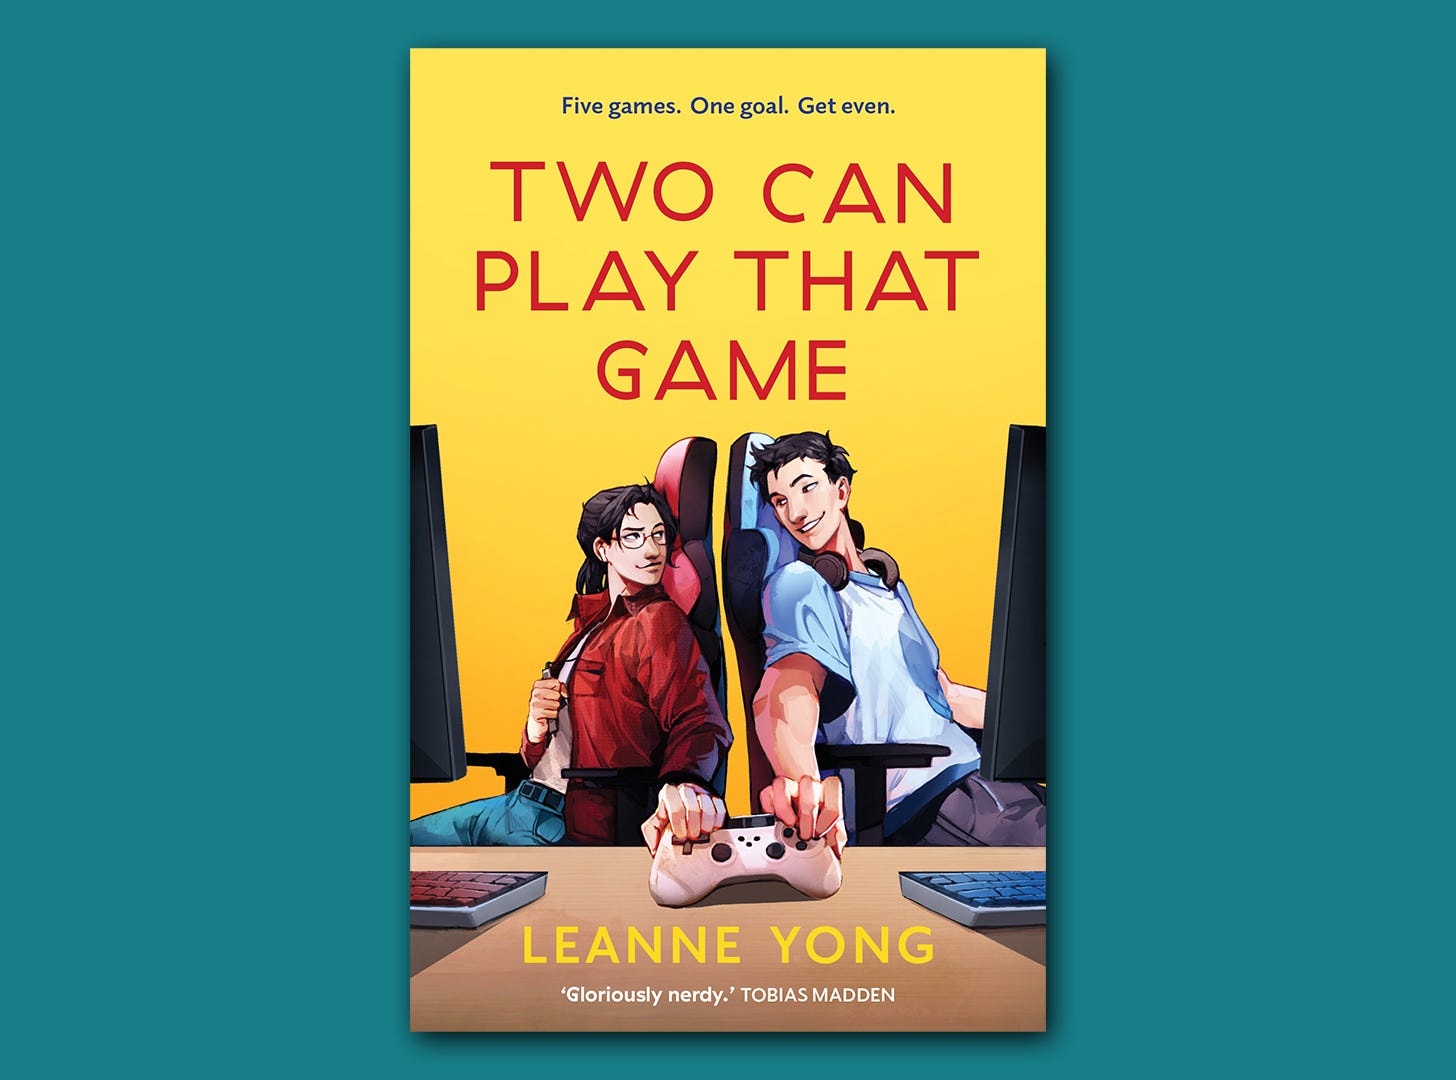 The book cover of 'Two Can Play That Game' superimposed on a blue colour block background. The book cover is a bright yellow showing an illustration of two teenagers sitting at their computers. The tagline reads 'Fives games. One goal. Get even.'